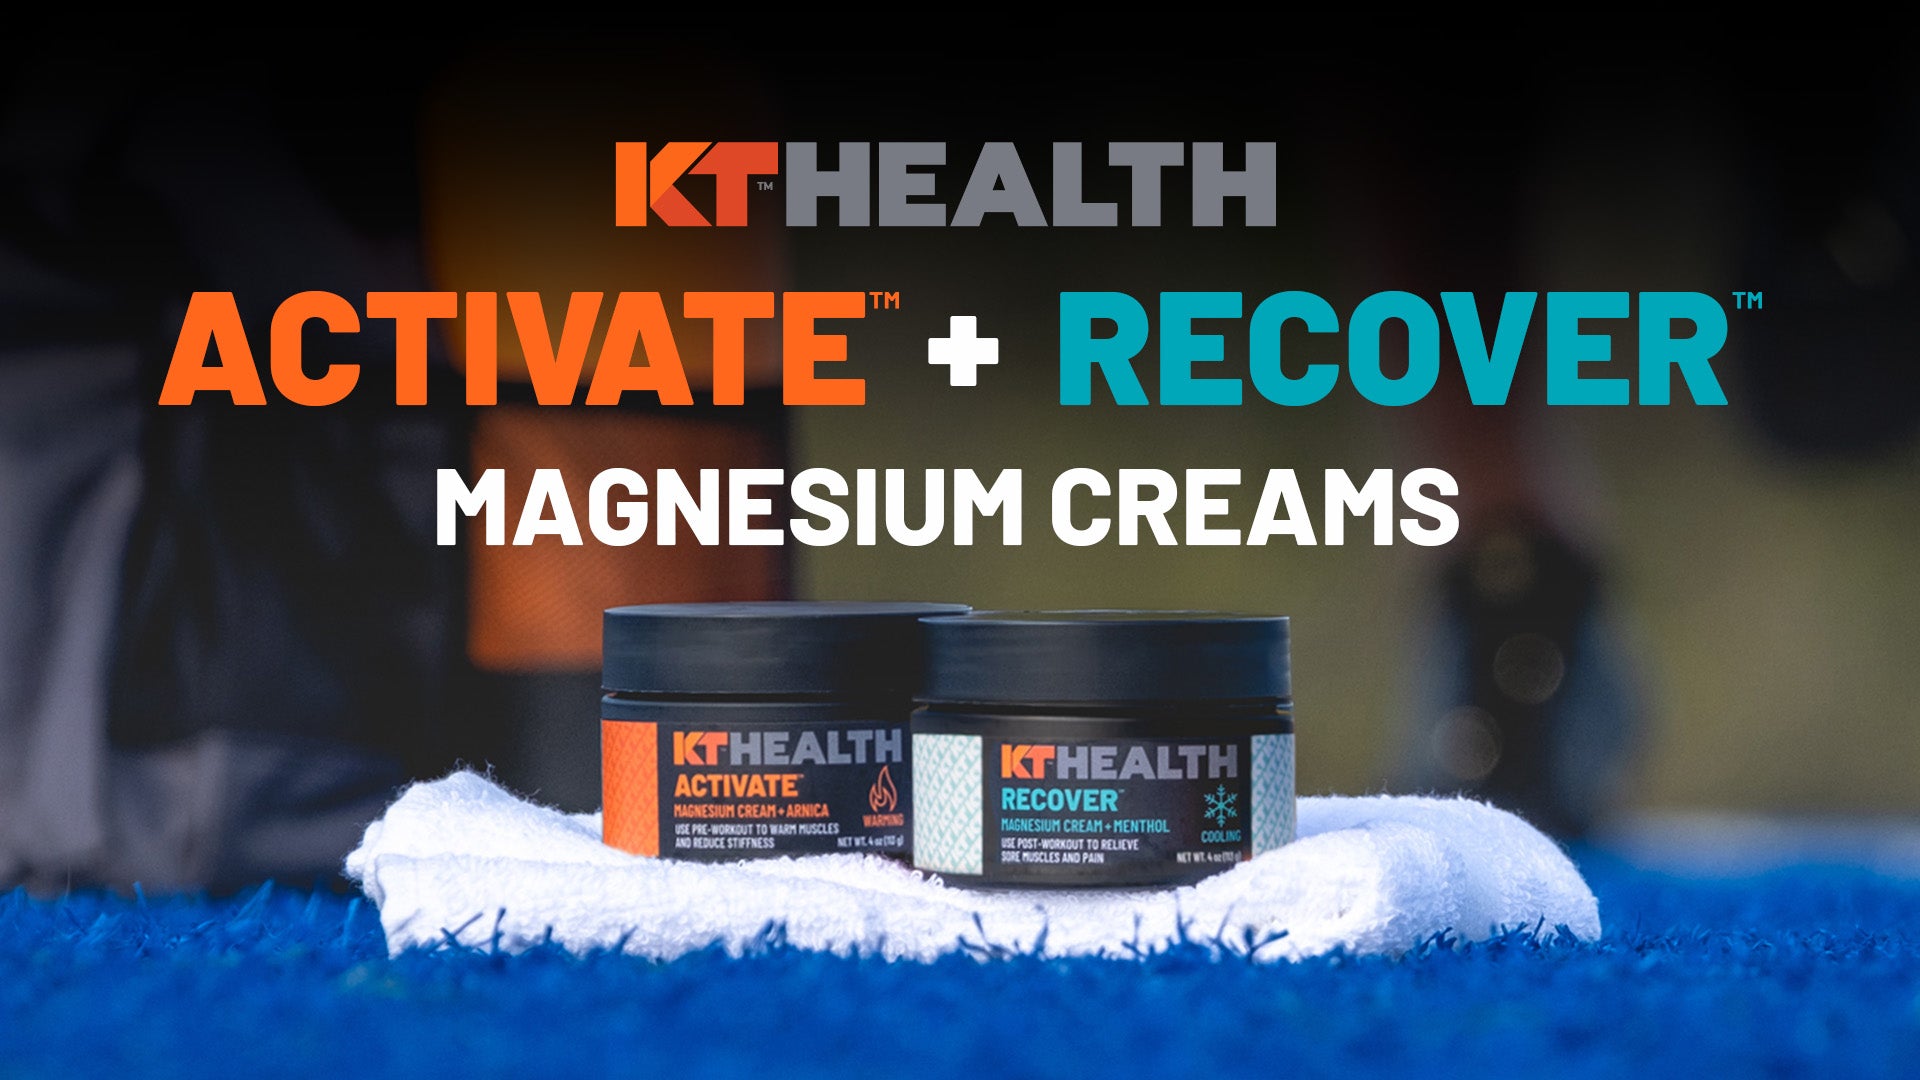 KT Health Activate & Recover Magnesium Creams